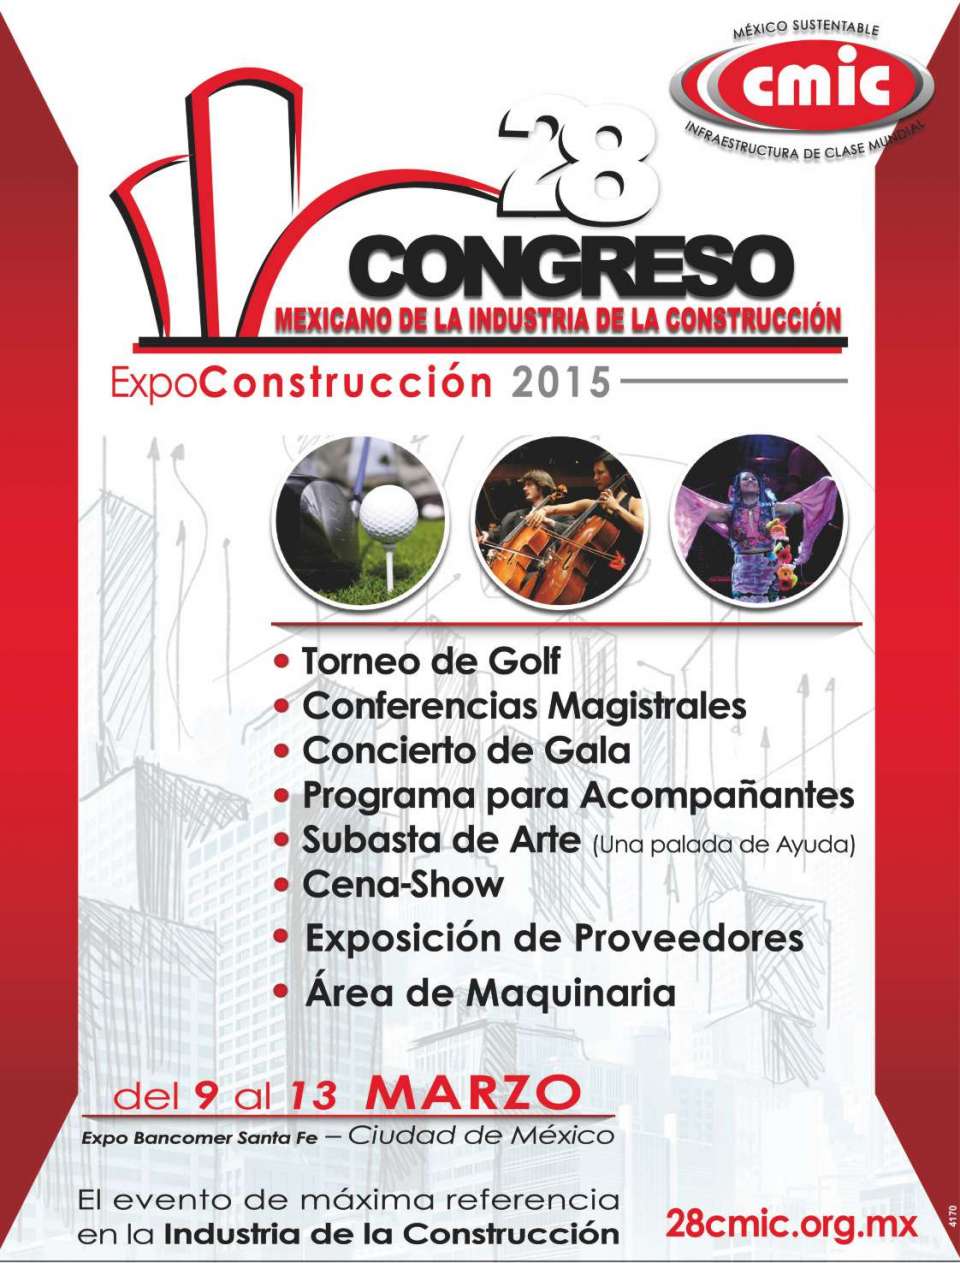 Expo Construccion and 28 CMIC Congress, the event of maximum reference in the construction industry